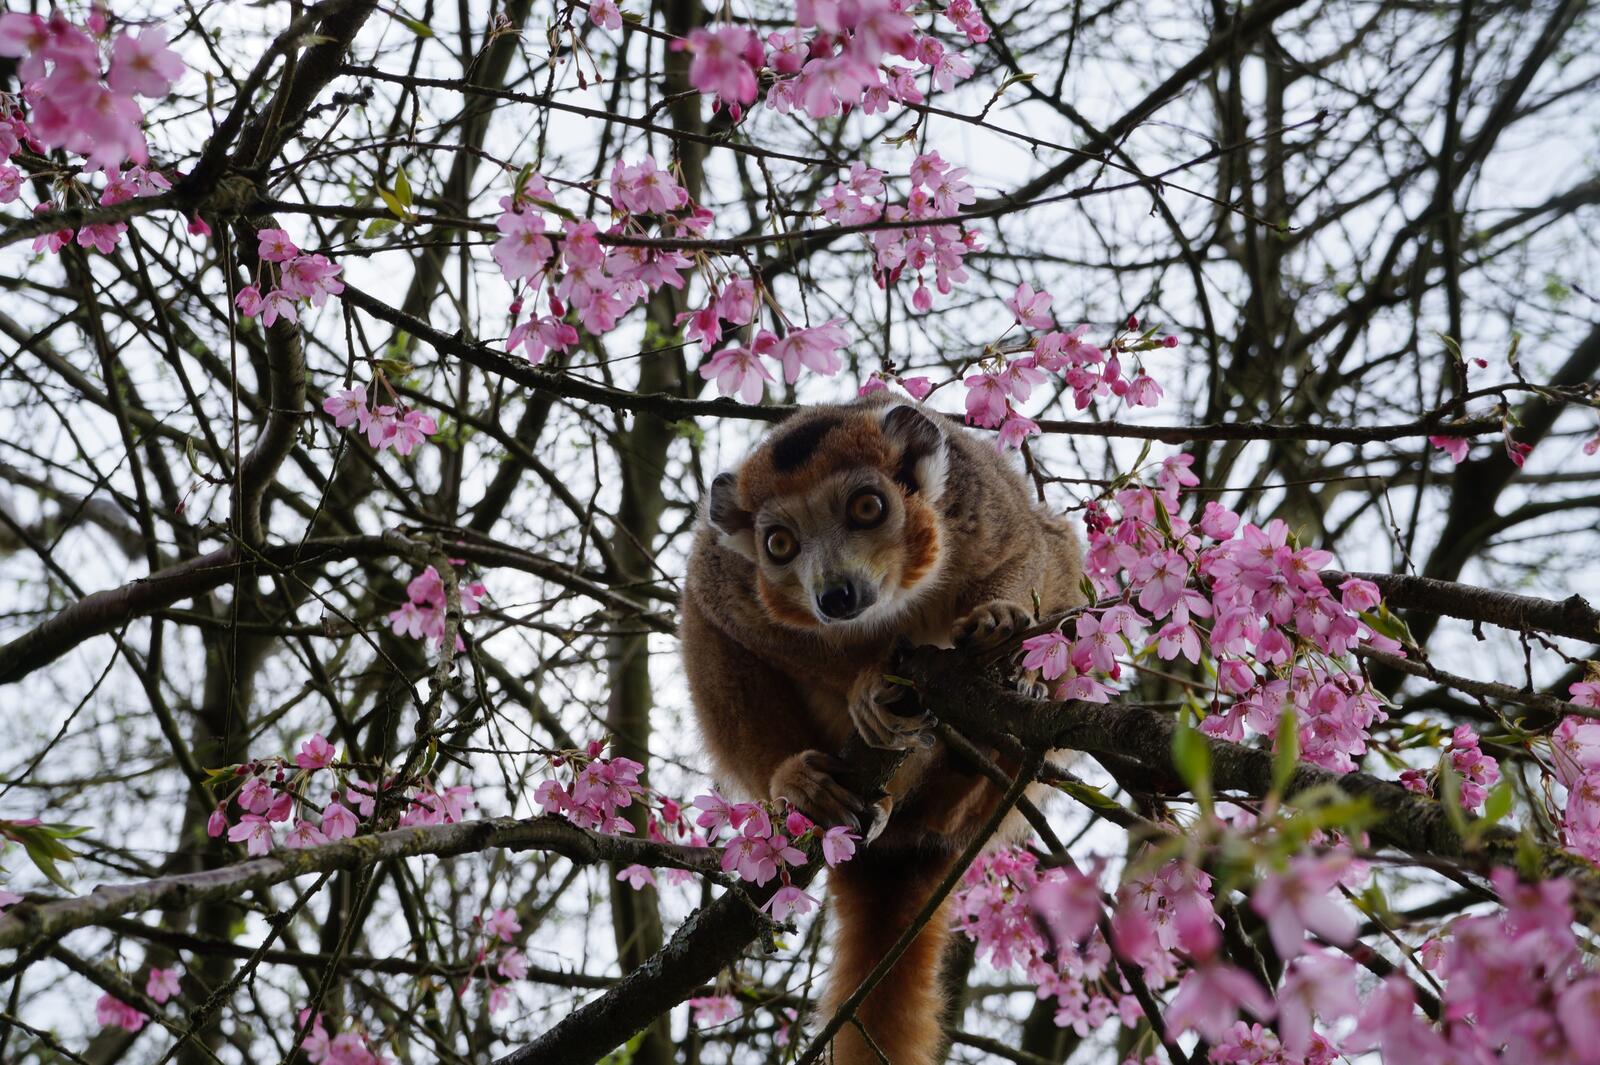 Wallpapers wallpaper monkey cherry blossom branches on the desktop